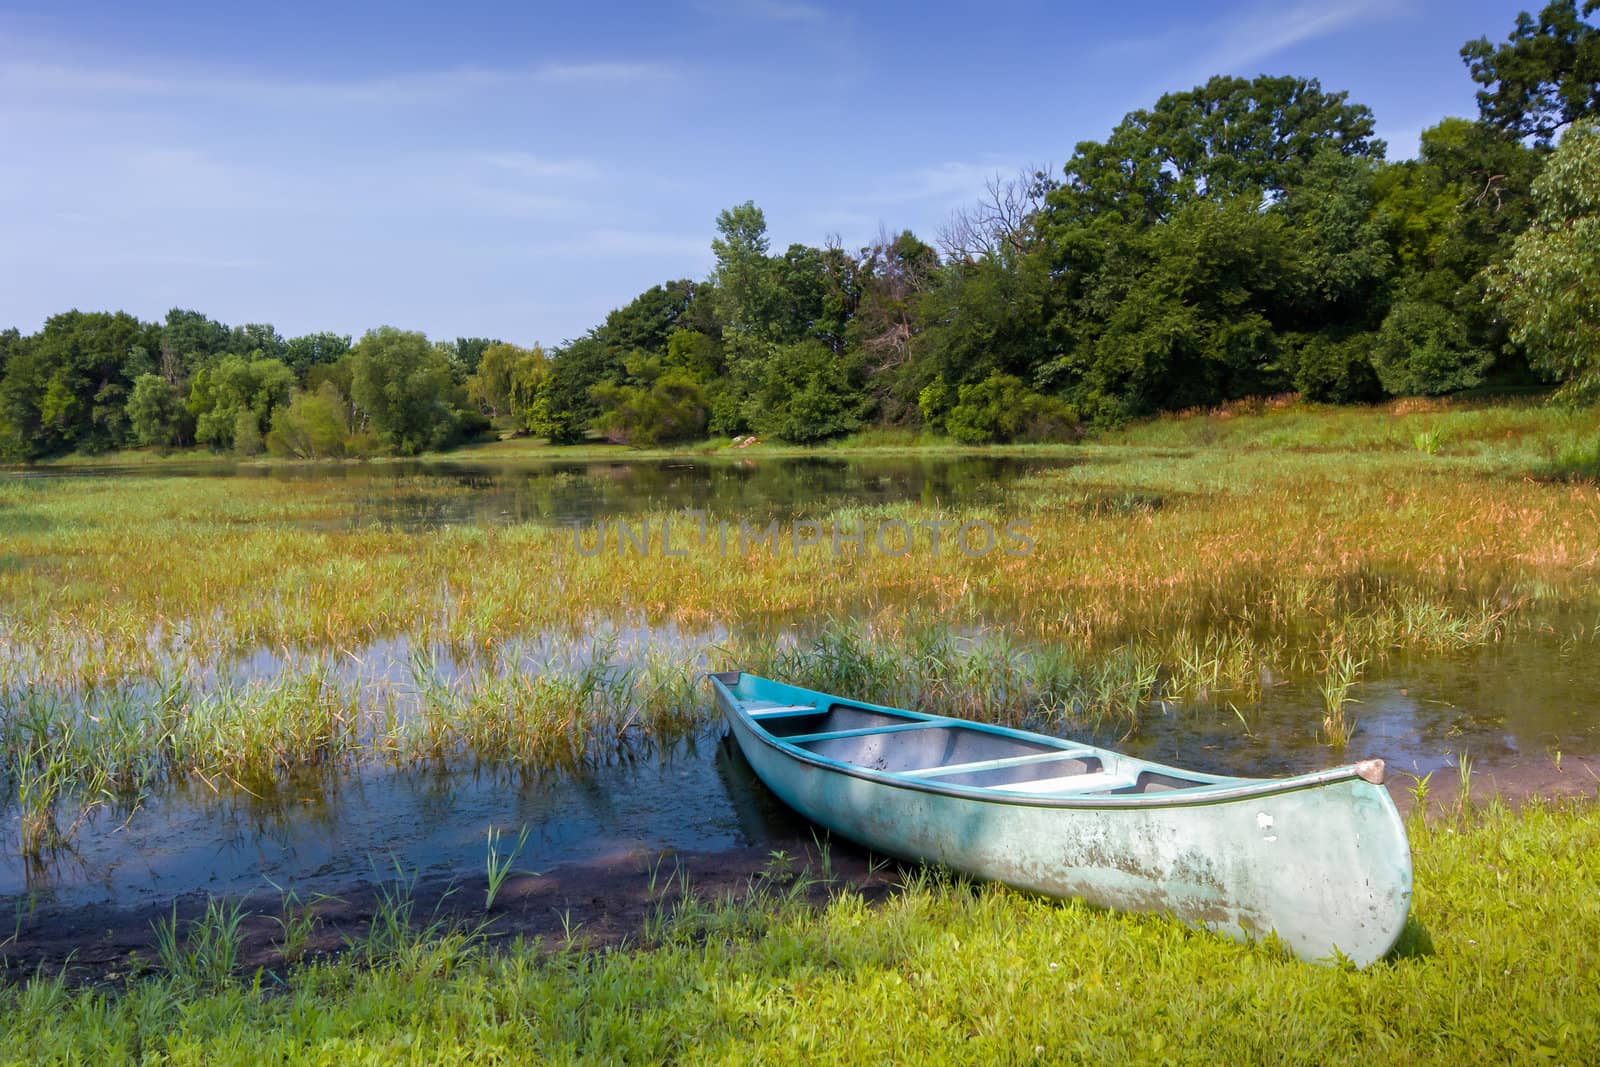 Canoe at the Shore of Beautiful Pond